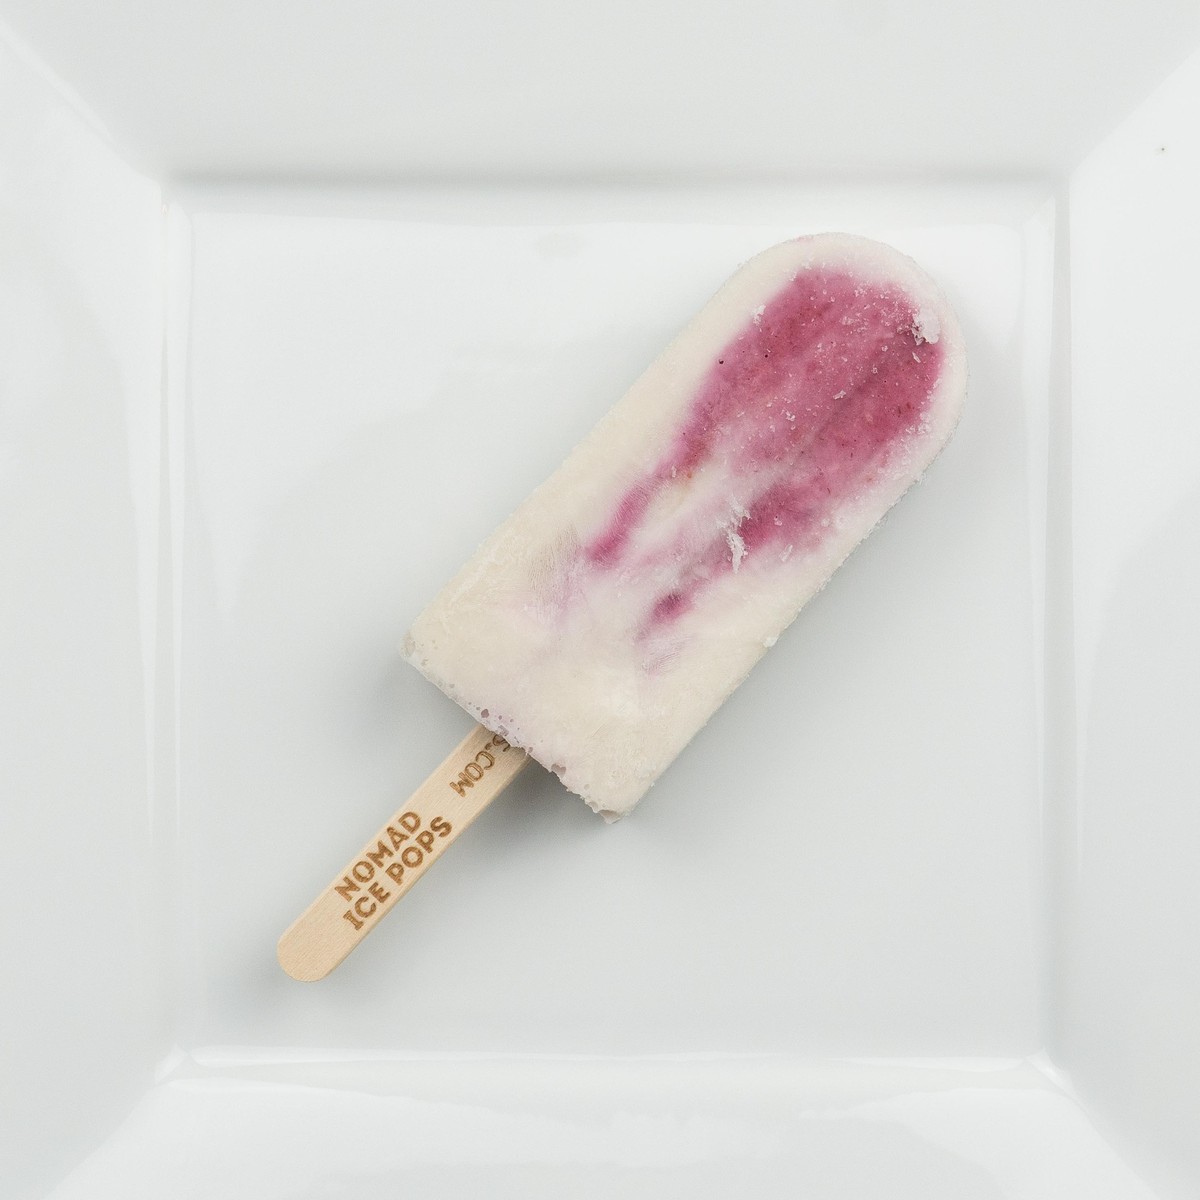 Nomad Ice Pops (@nomadicepops) • Instagram photos and videos